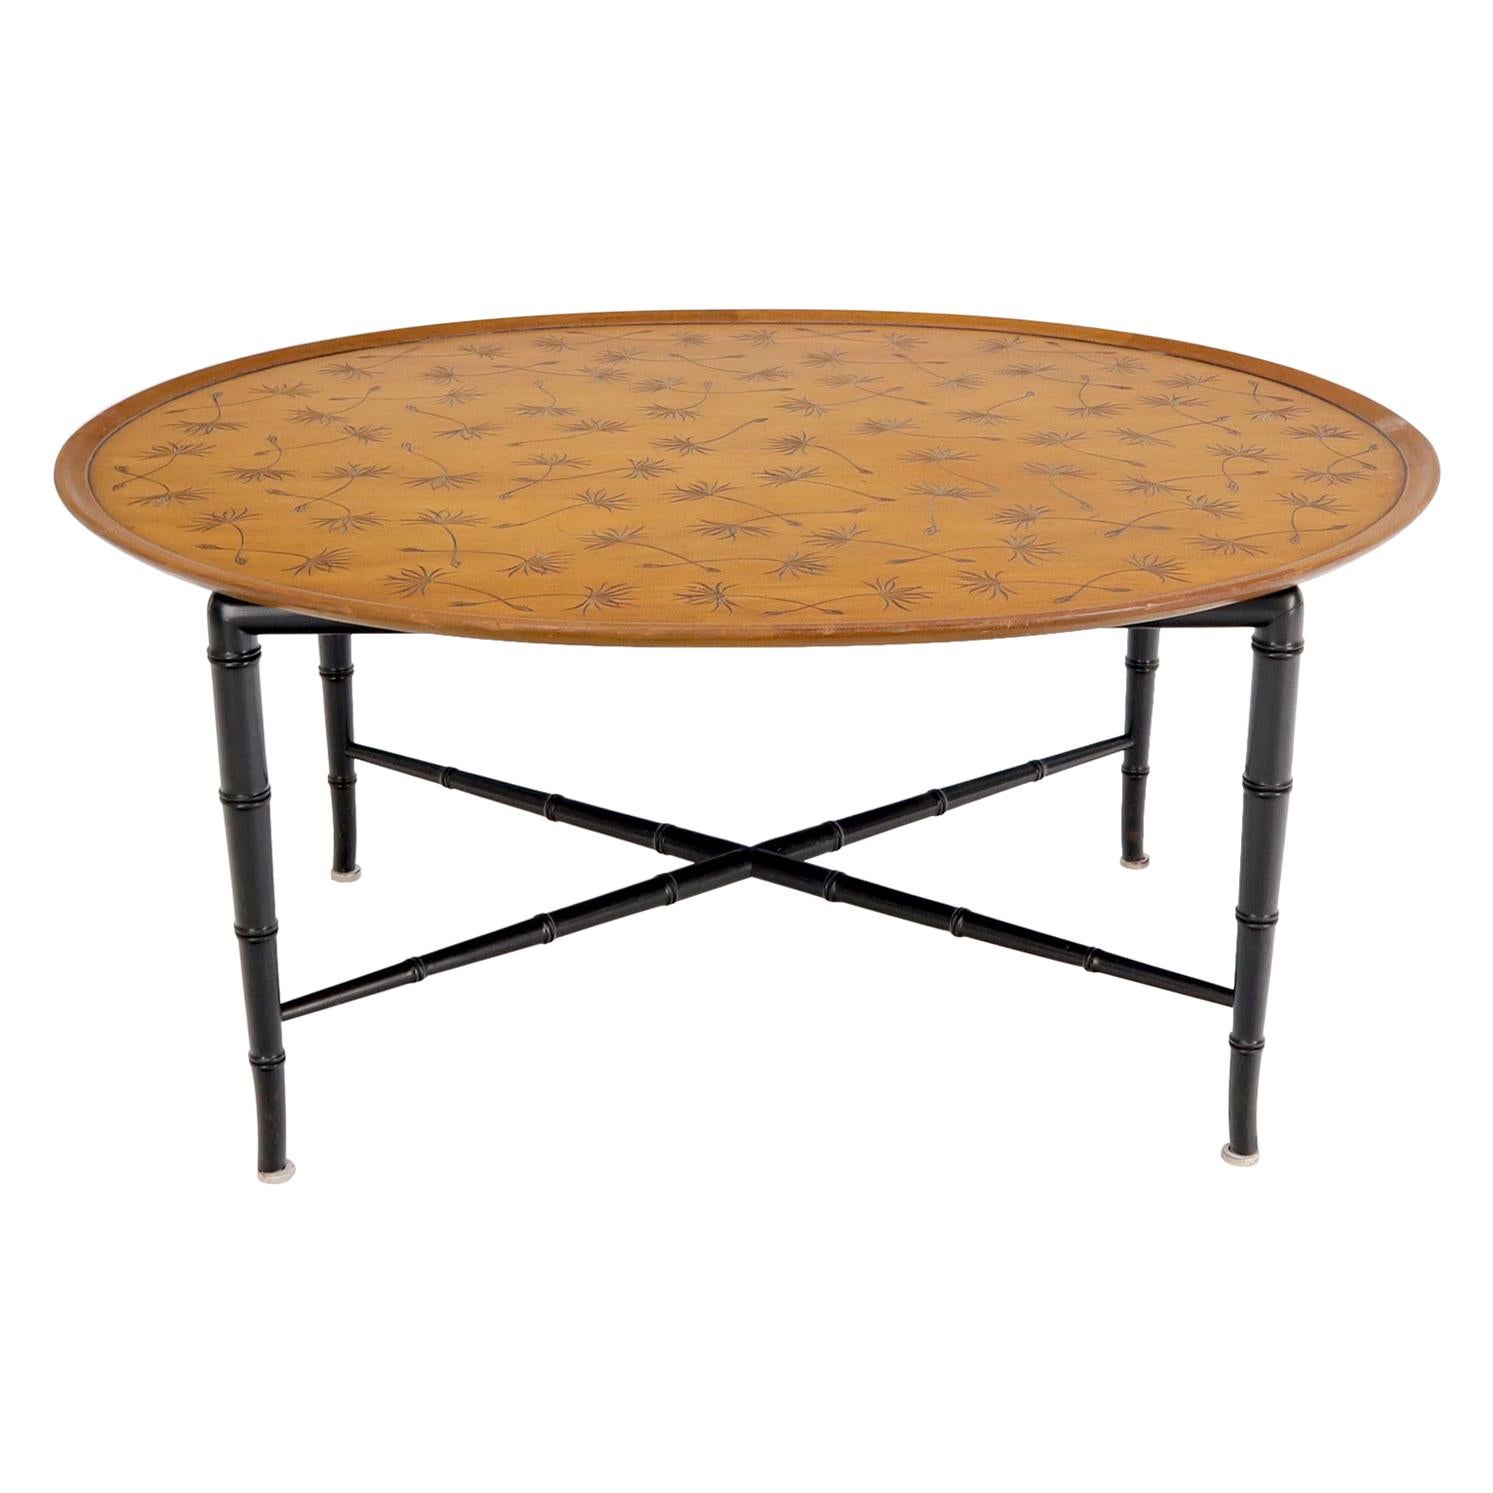 Oval Kittinger Coffee Table Faux Bamboo Tapered Legs Incised Leafs Design on Top For Sale